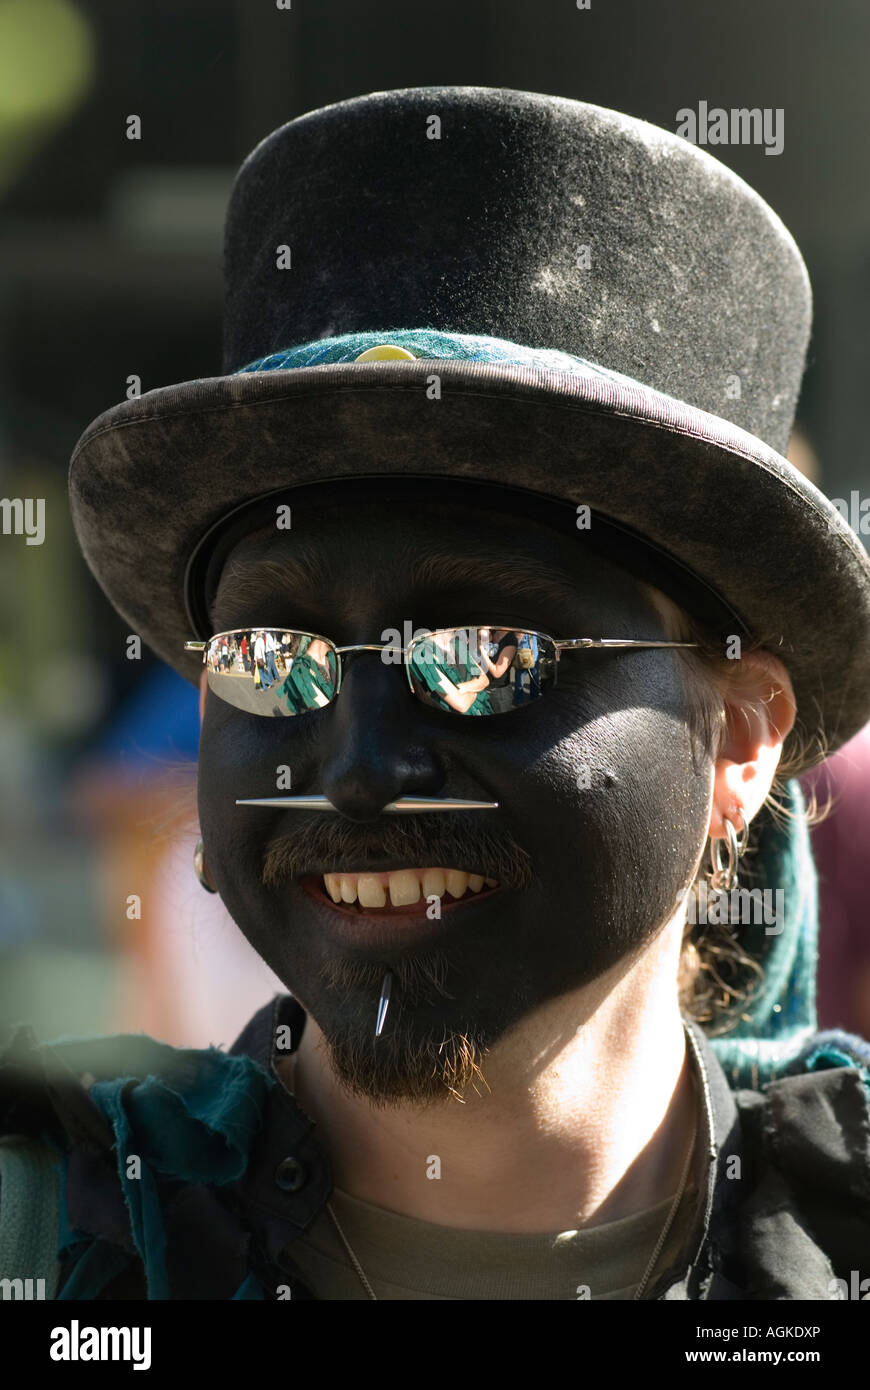 Blacked Up Morris dancers UK. Black face modern Morris dancer with nose and chin piercing Deal Kent England 2007 2000s HOMER SYKES Stock Photo